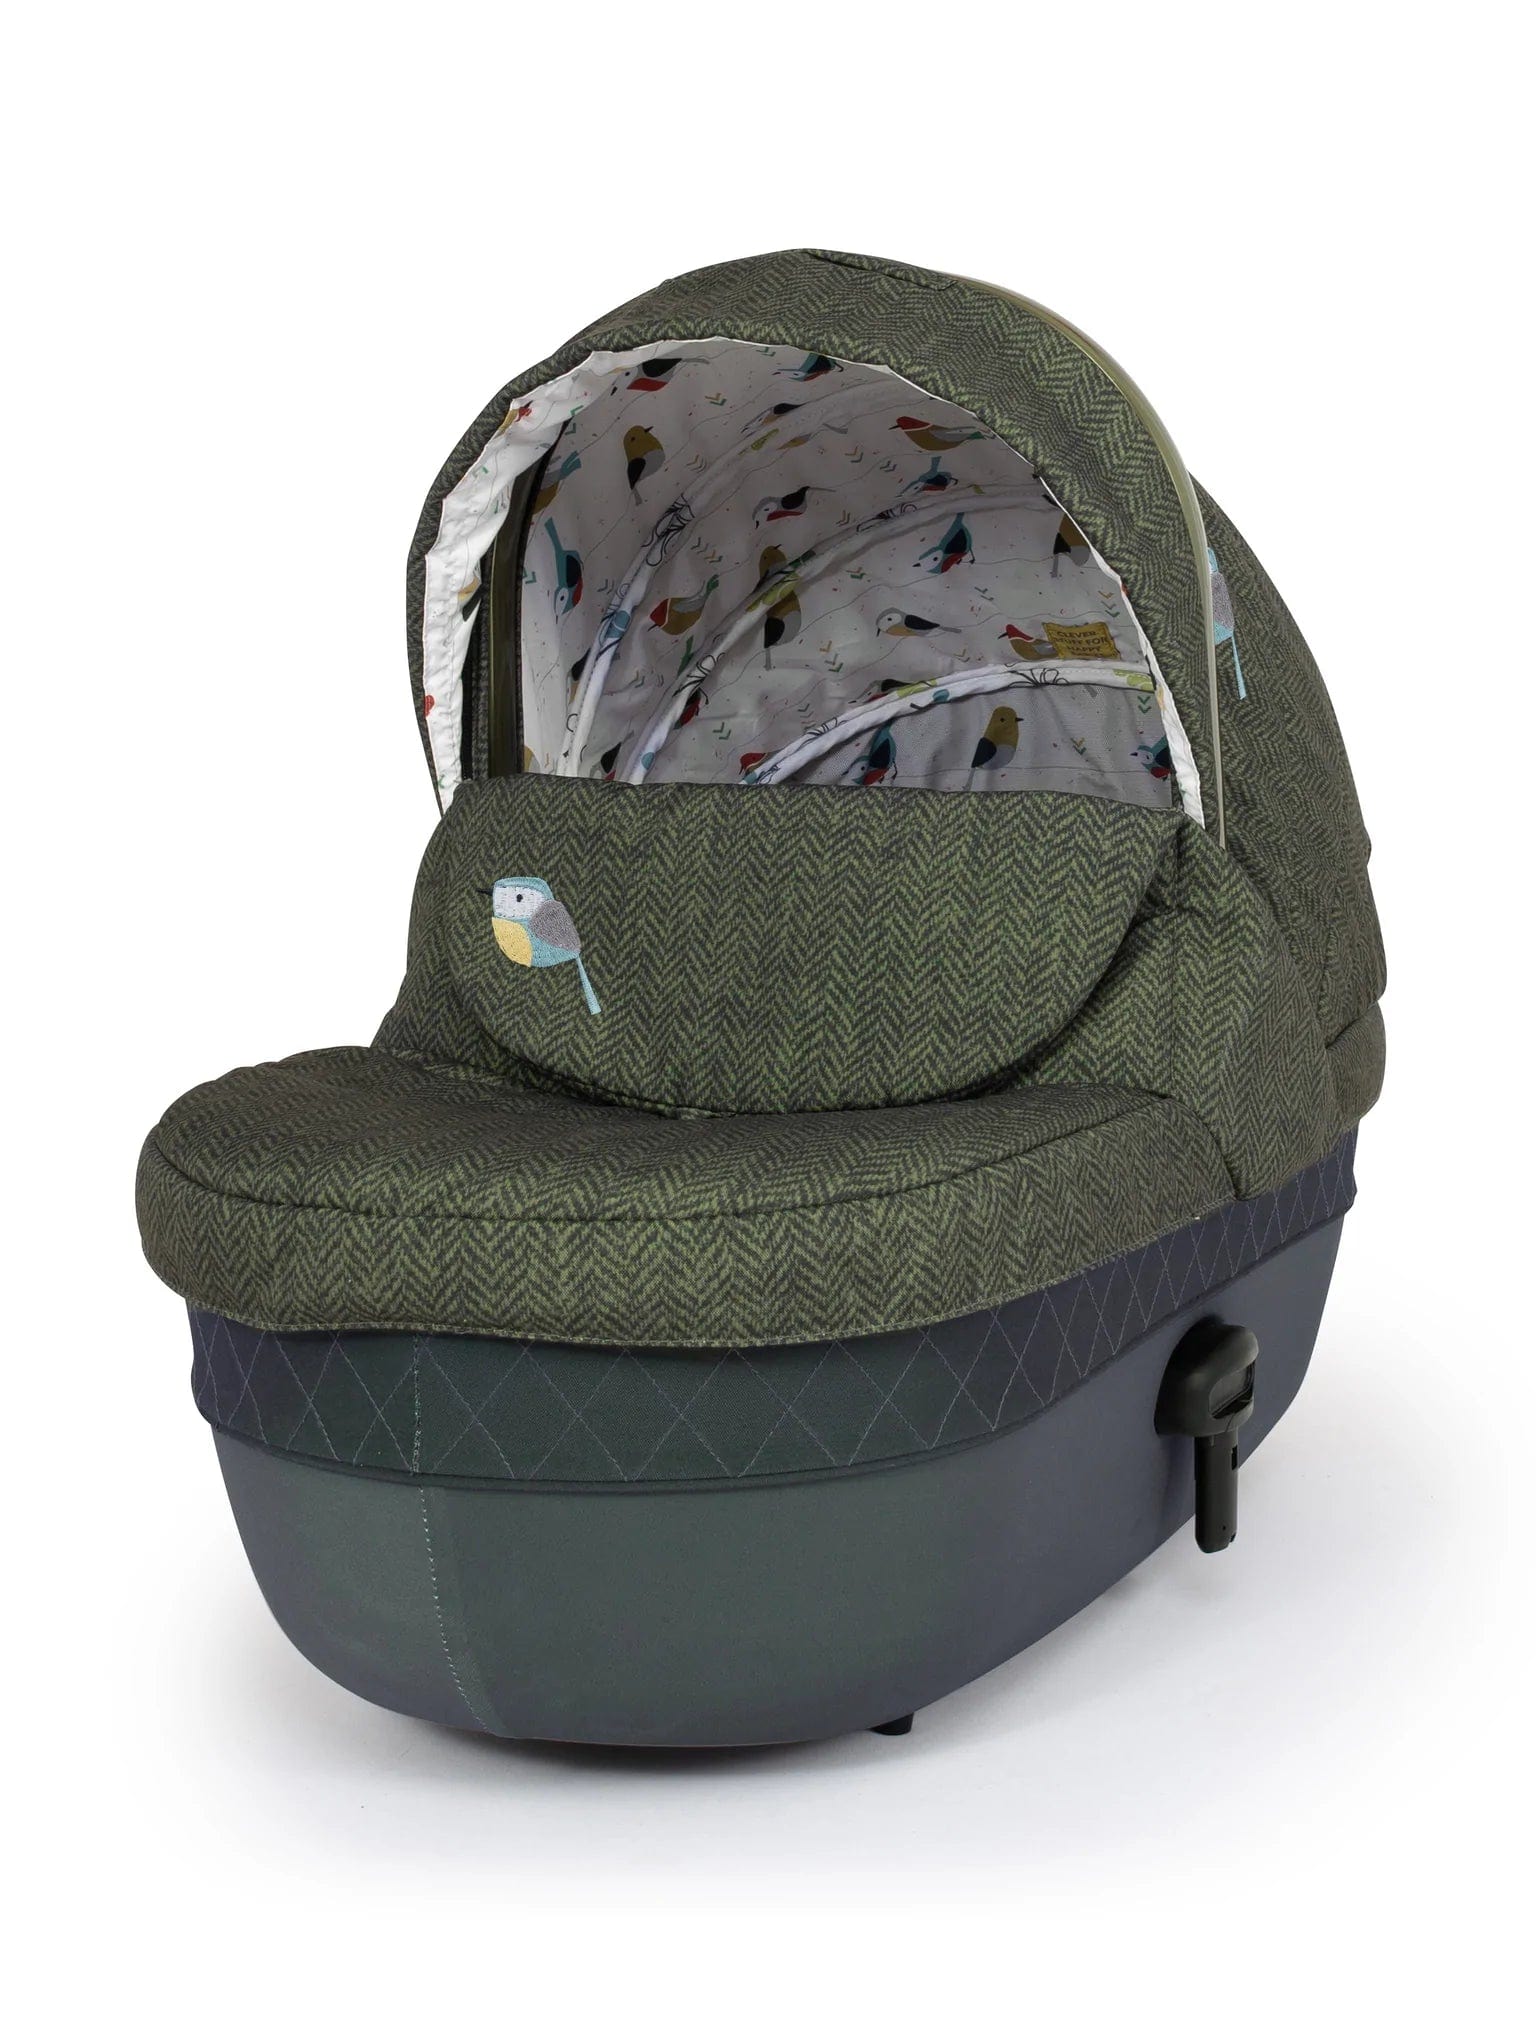 Cosatto Prams & Car Seat Bundles Cosatto Wow Continental Everything Bundle - Direct Delivery